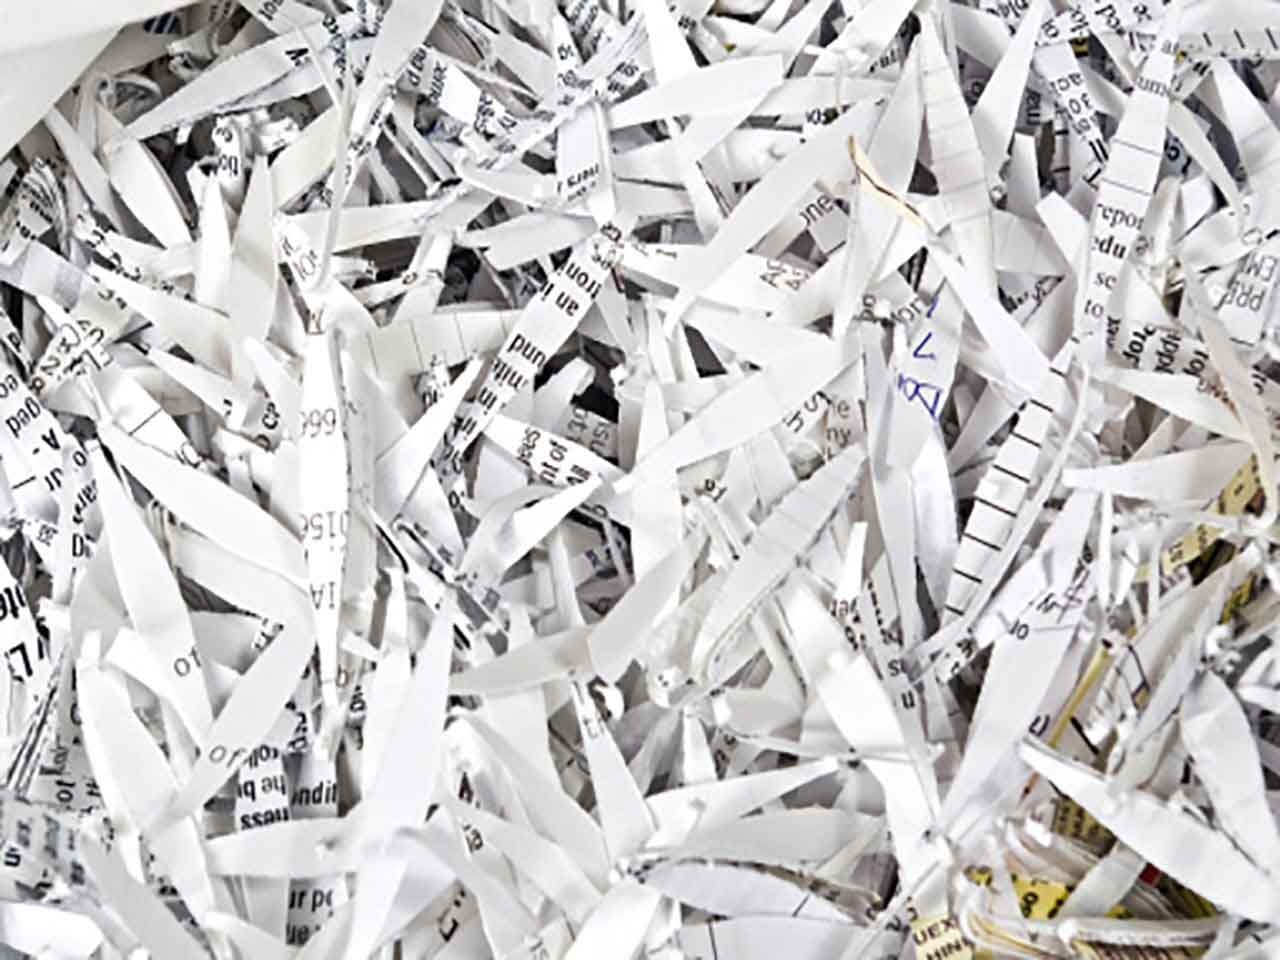 Shredded bank statements and personal documents